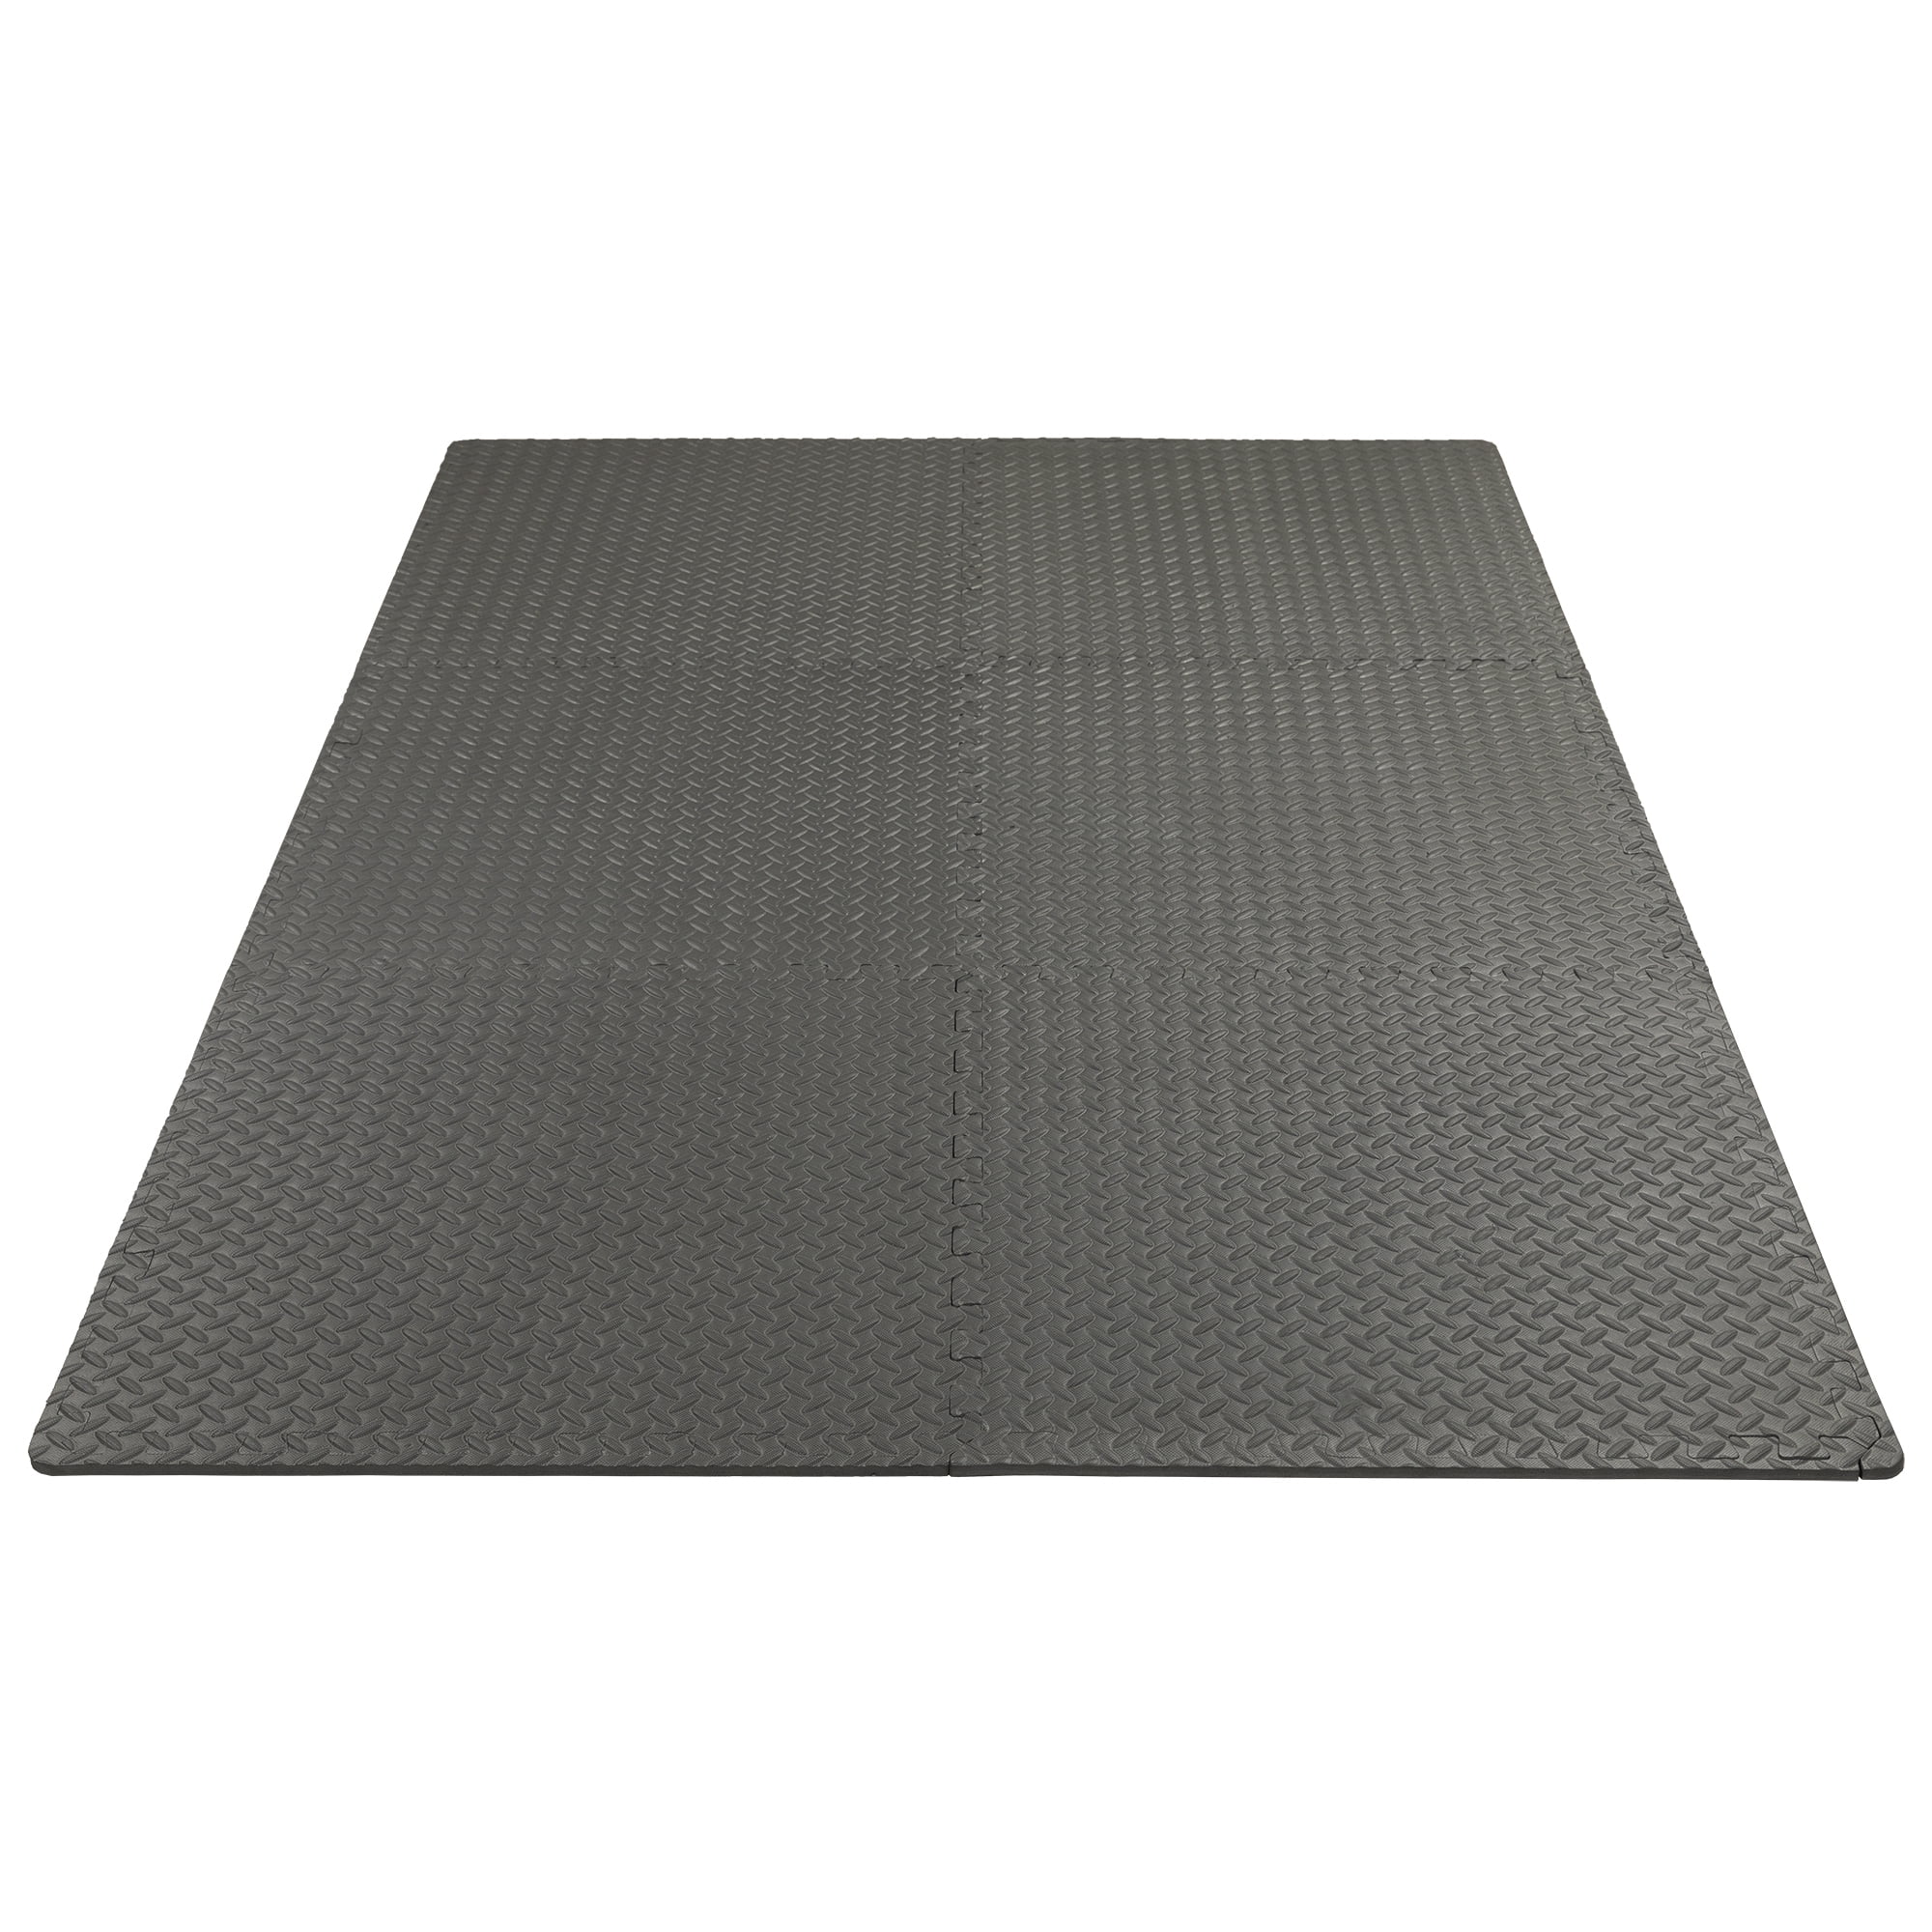  Outdoor Modular Interlocking Floor Mat System,EVA Non-Slip Front  Door Entryway Mat,Welcome Rug Mat for Home Entrance,Exterior Drainage Tiles  Cushion(Size:60 * 120cm/24 * 47in) : Everything Else